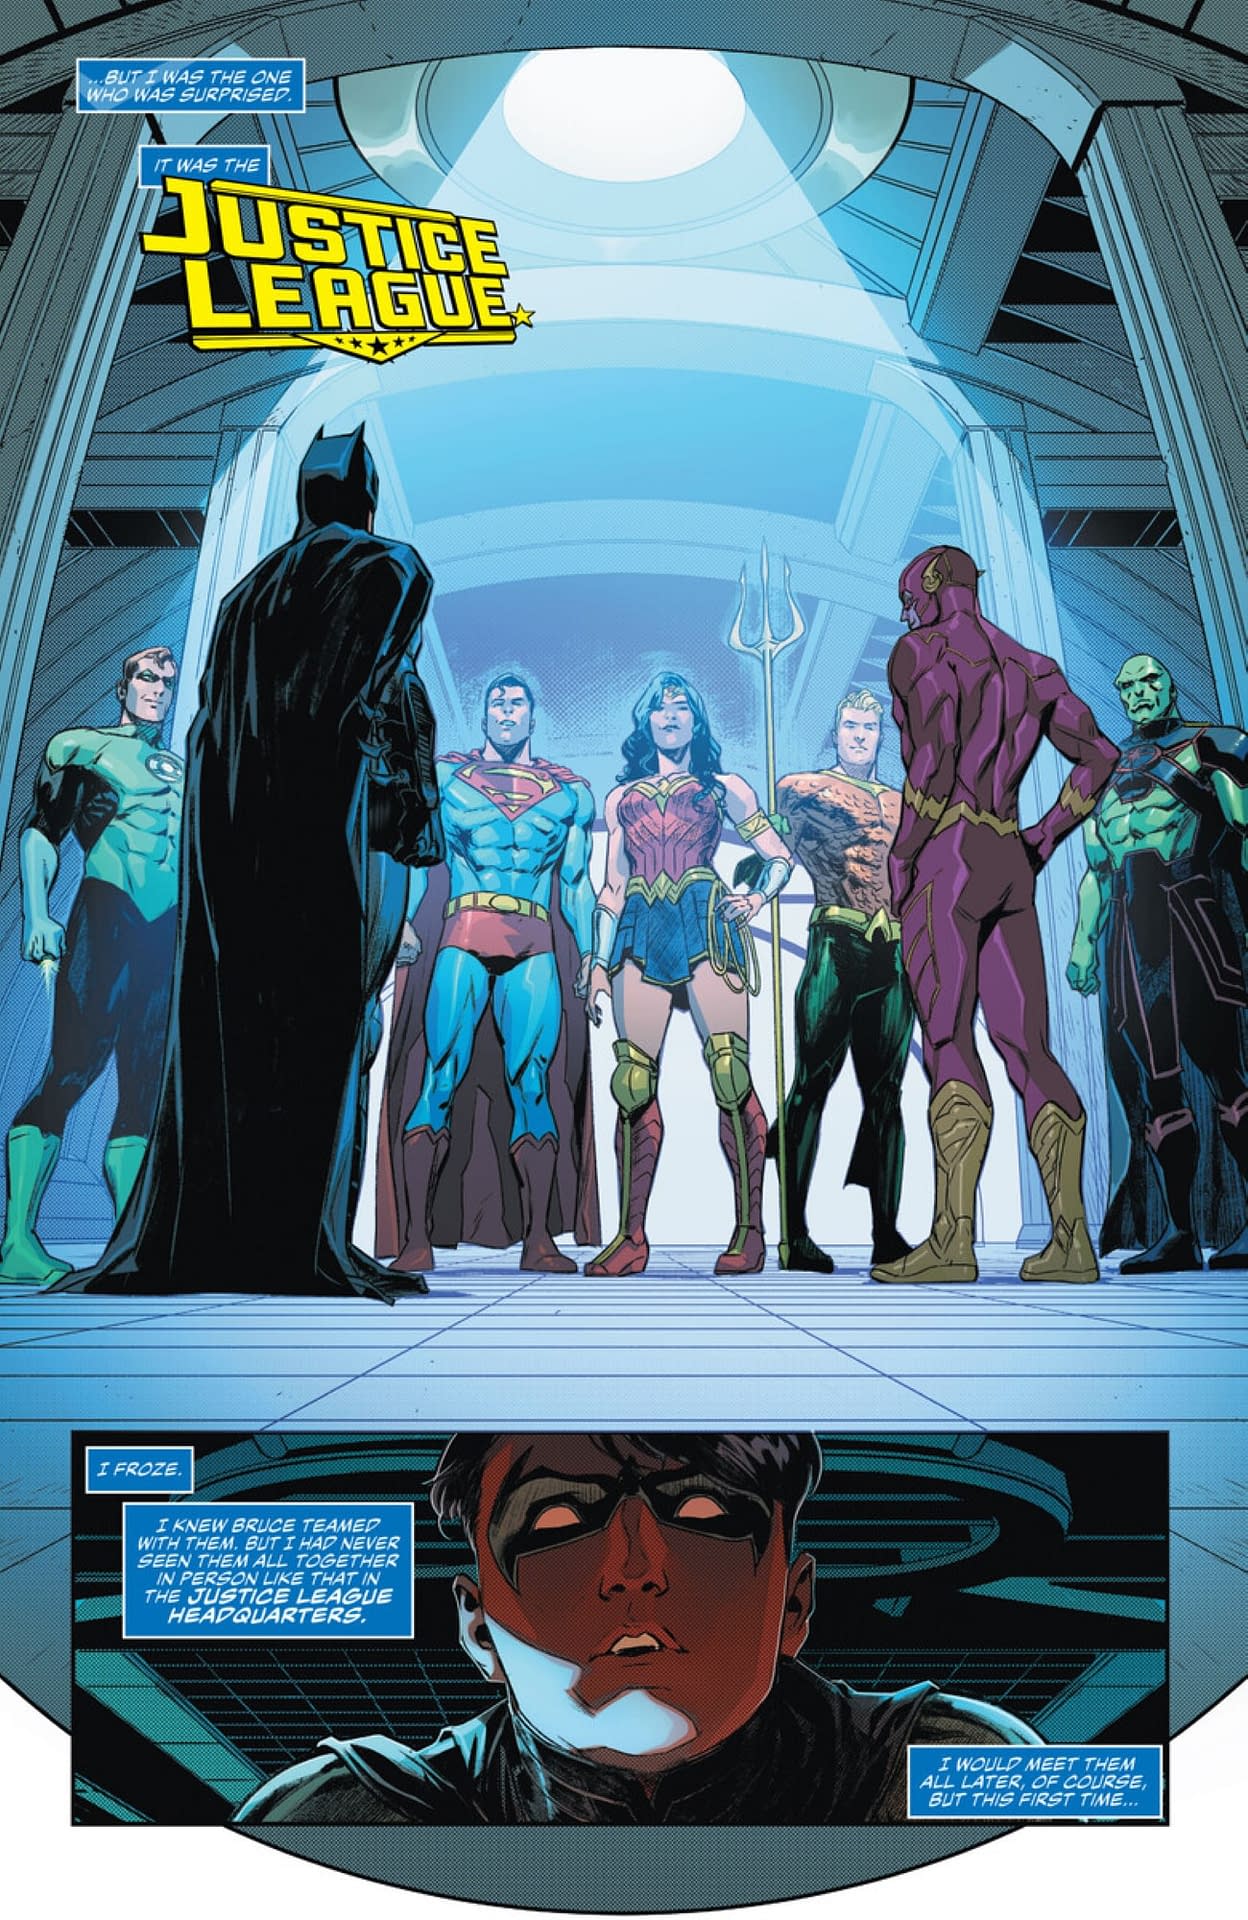 Justice League #53 Reveals New DC Comics-Approved Swear Word